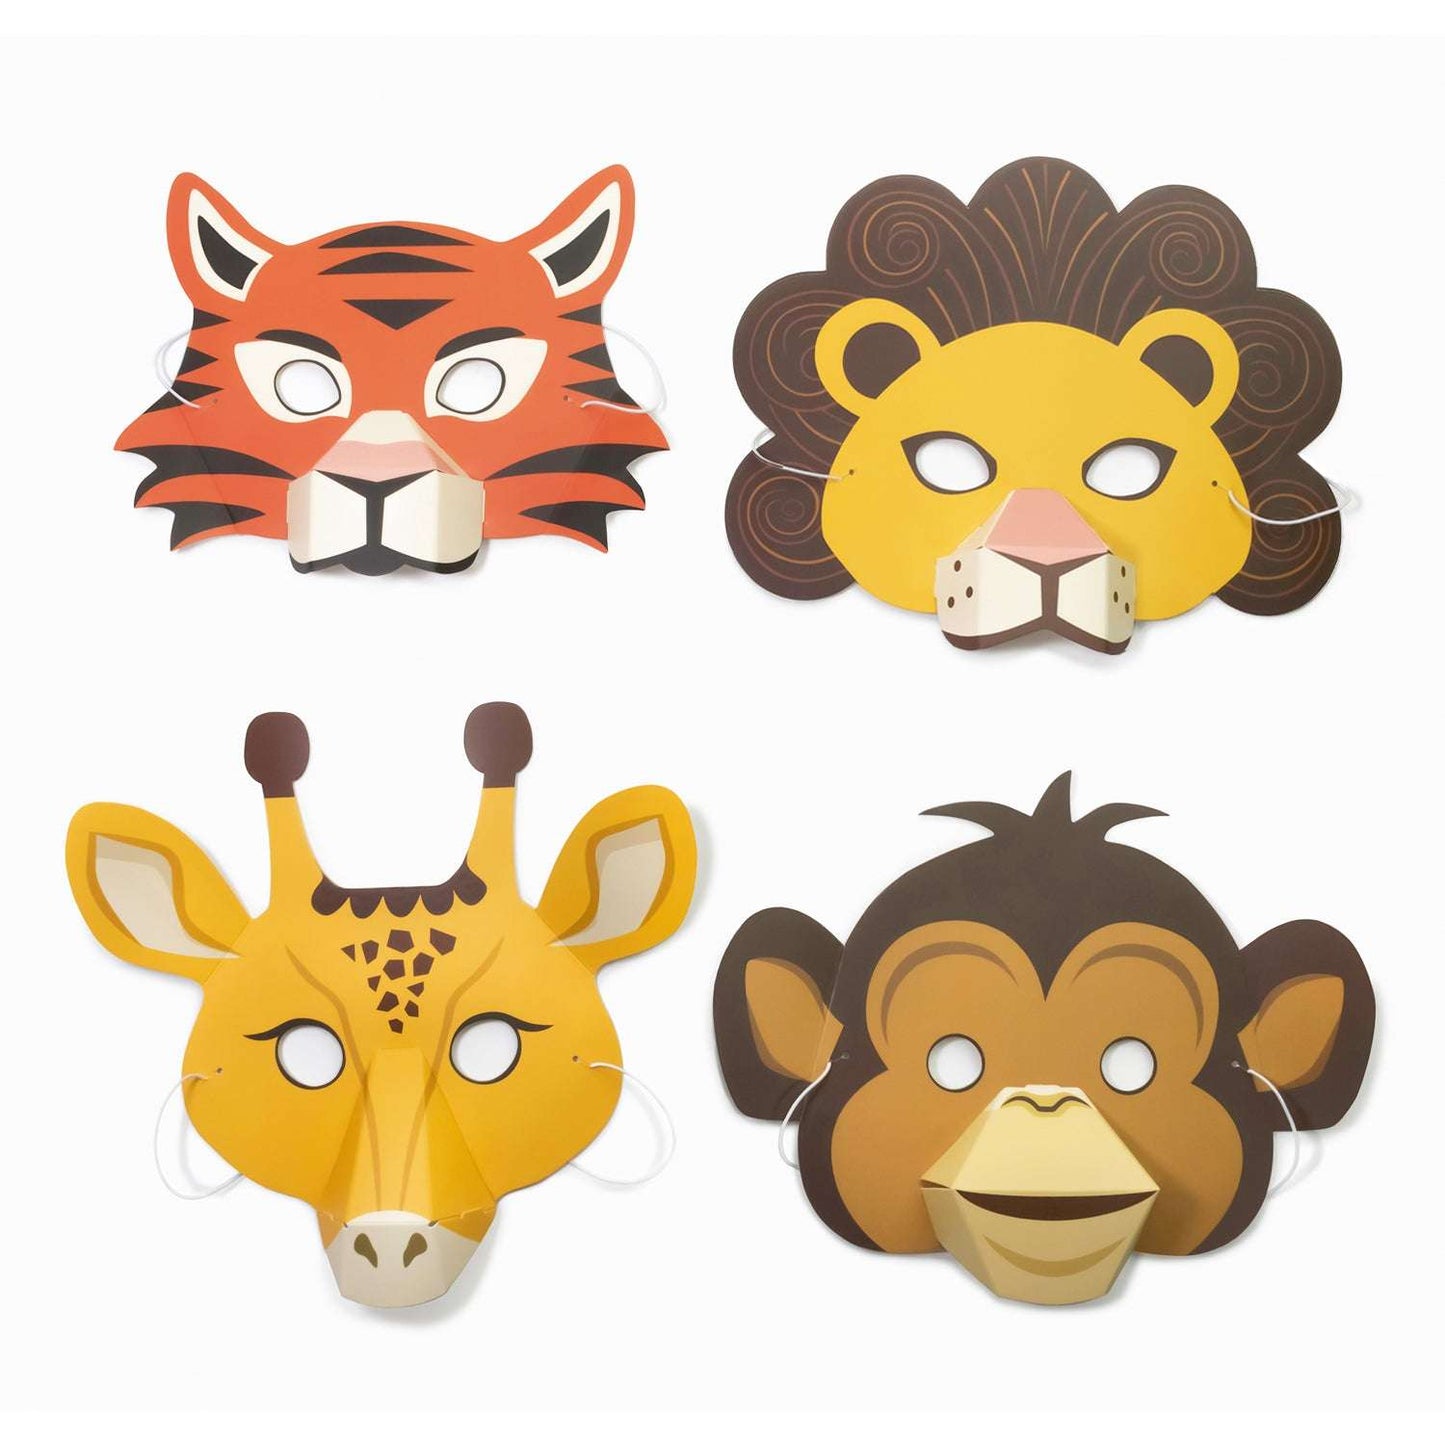 Create Your Own Animal Masks